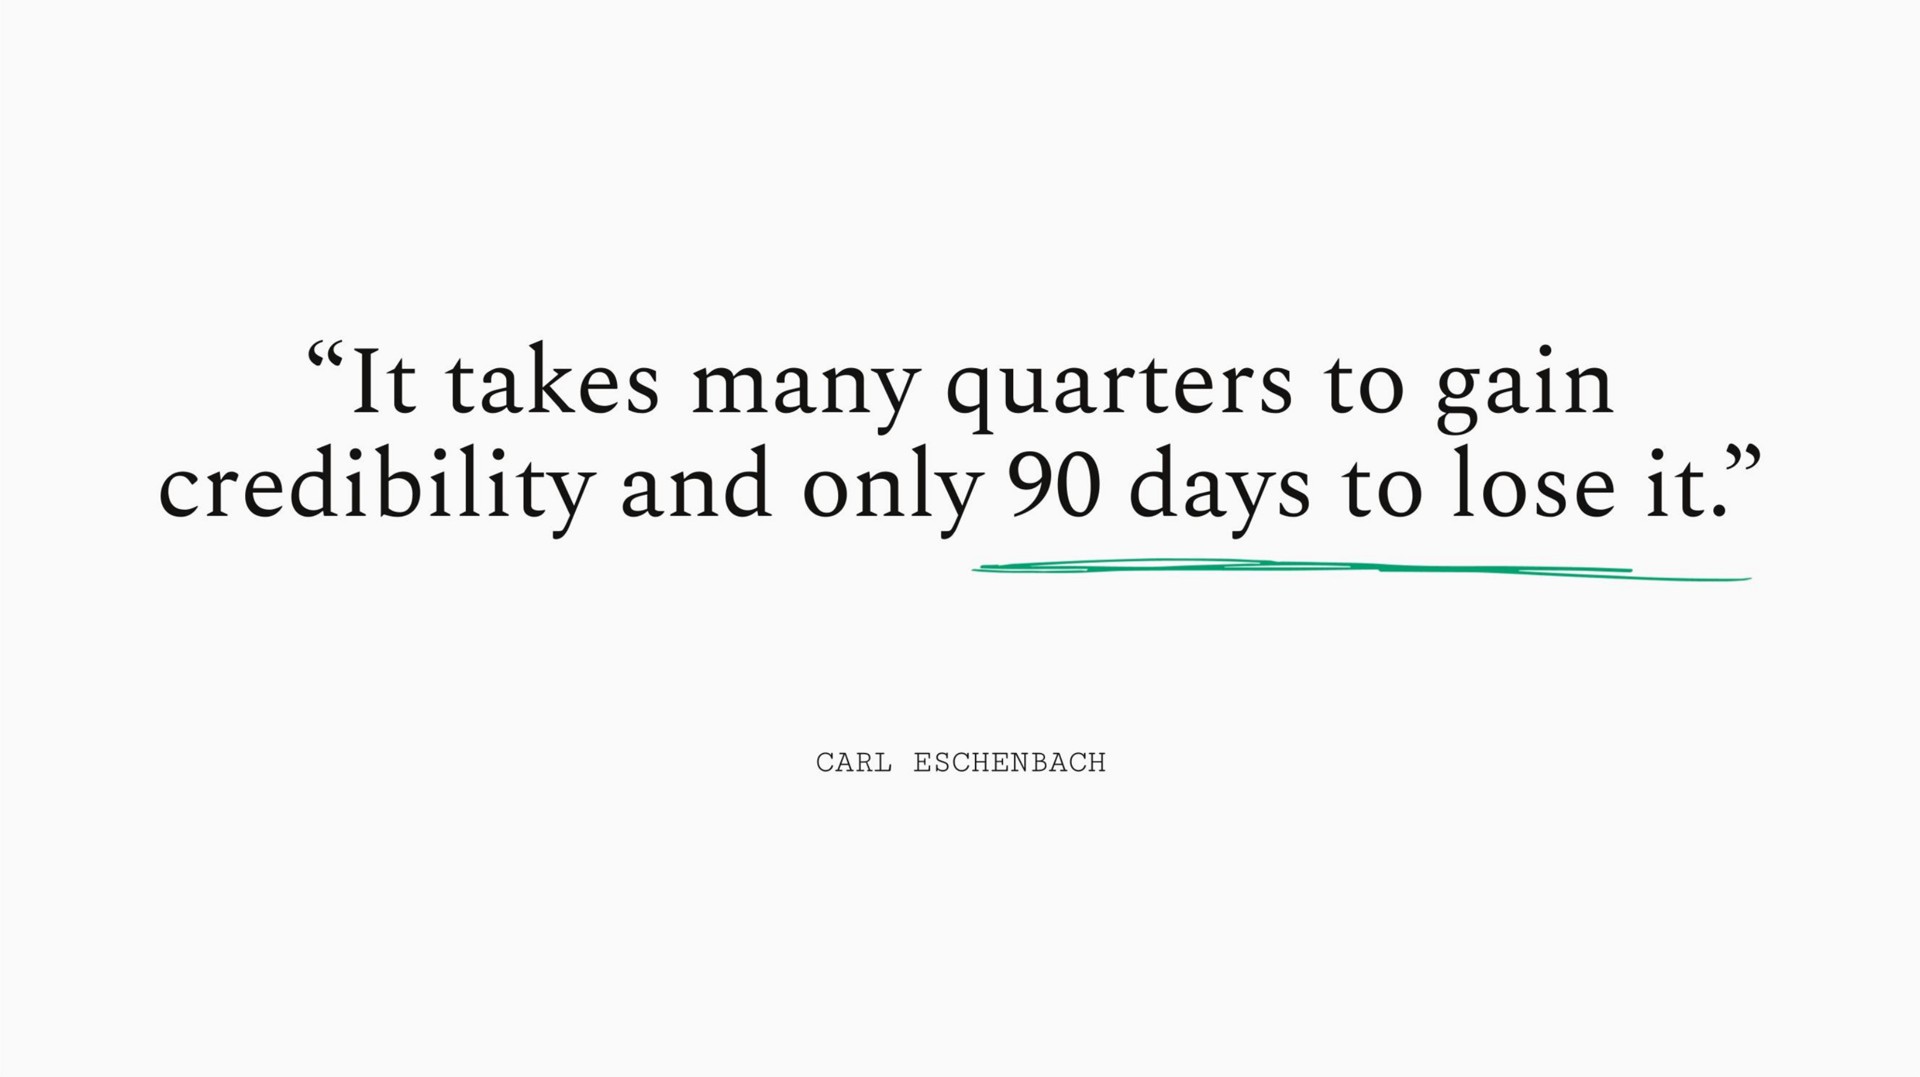 it takes many quarters to gain credibility and only days to lose it | Sequoia Capital